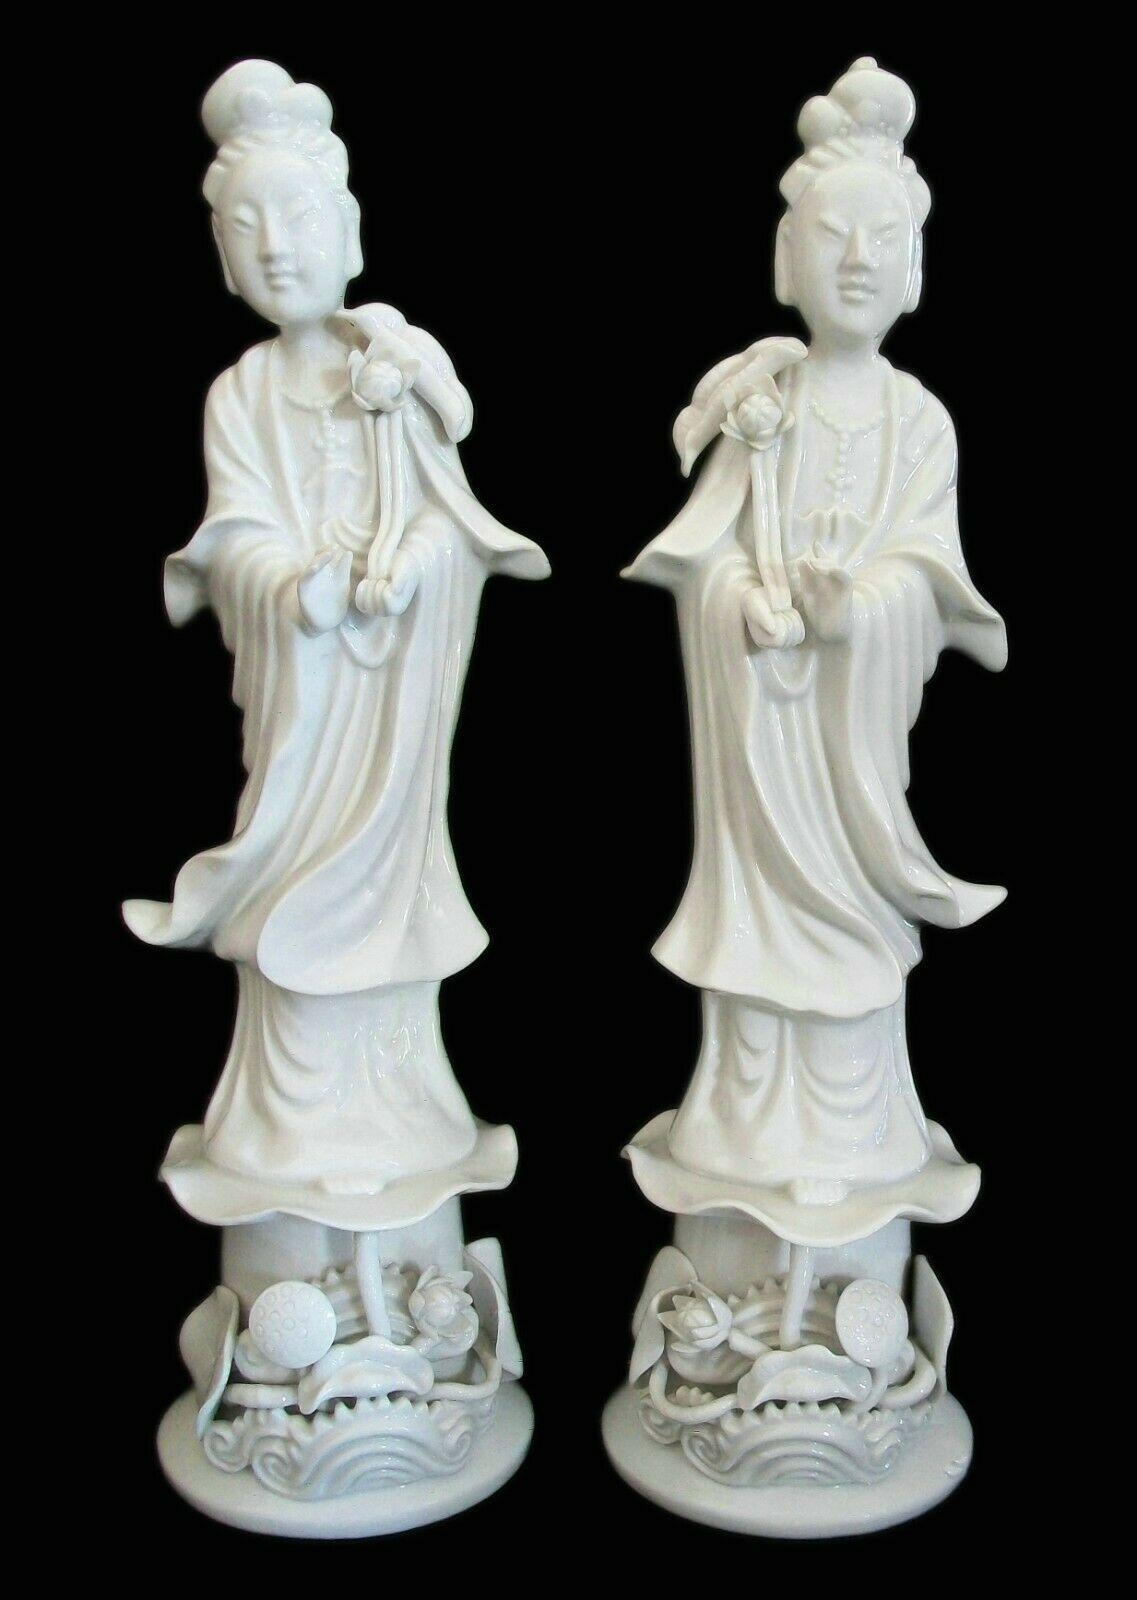 Fine vintage pair of 'Blanc de Chine' porcelain Guanyin statues - each figure holding an applied flower and standing on a lotus leaf and decorative stand - old importers foil label to the inside of each base (Montreal, Canada) - unsigned - China -